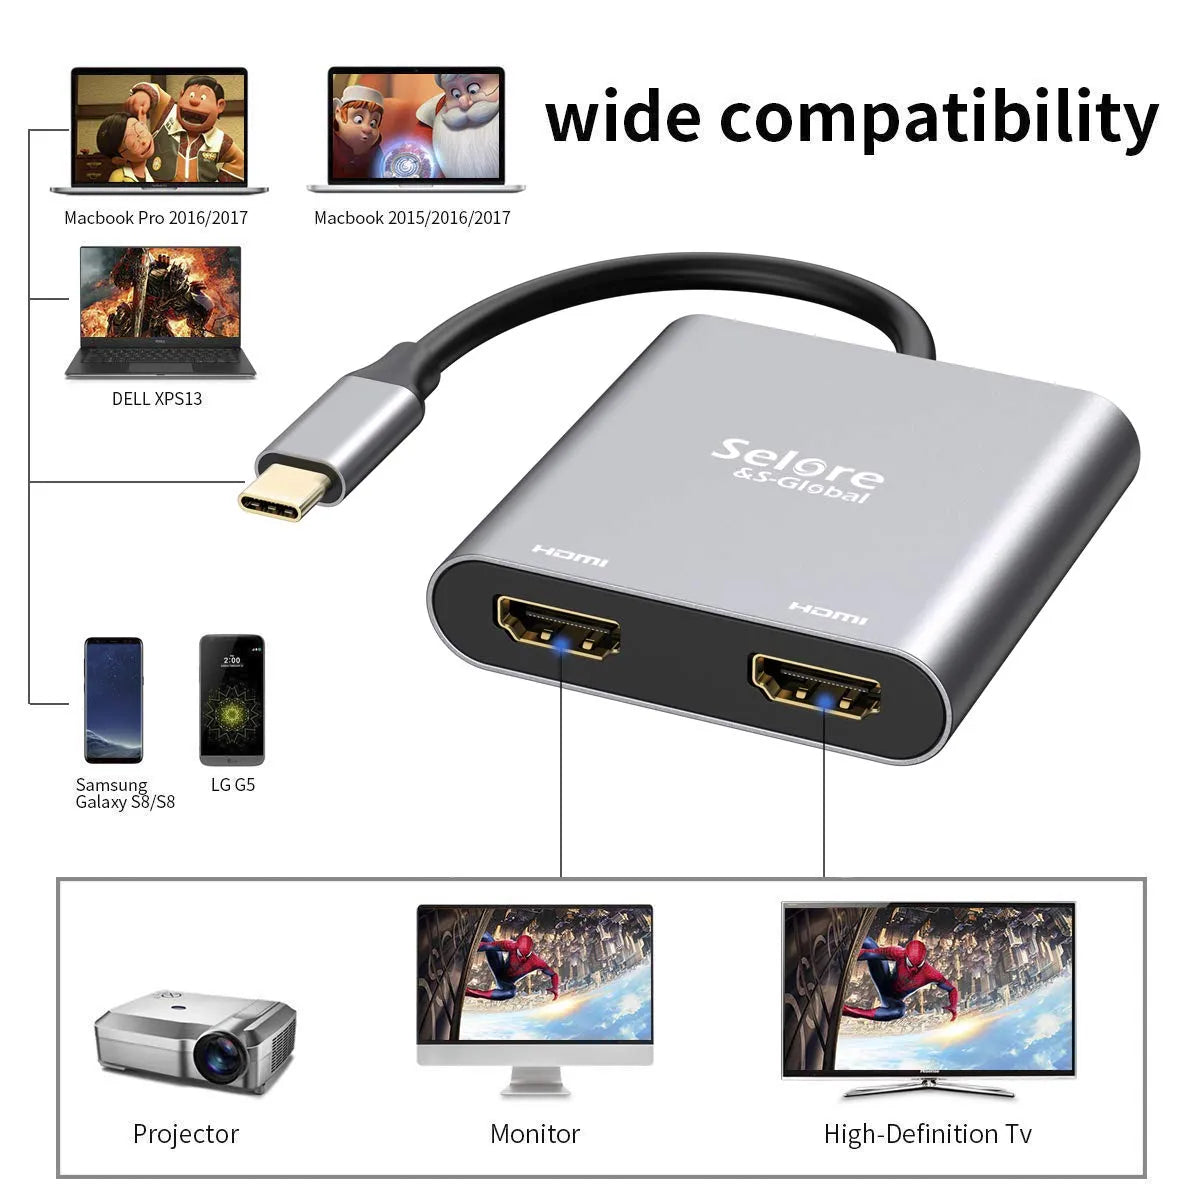 Selore USB C to Dual HDMI Adapter 8 IN 1